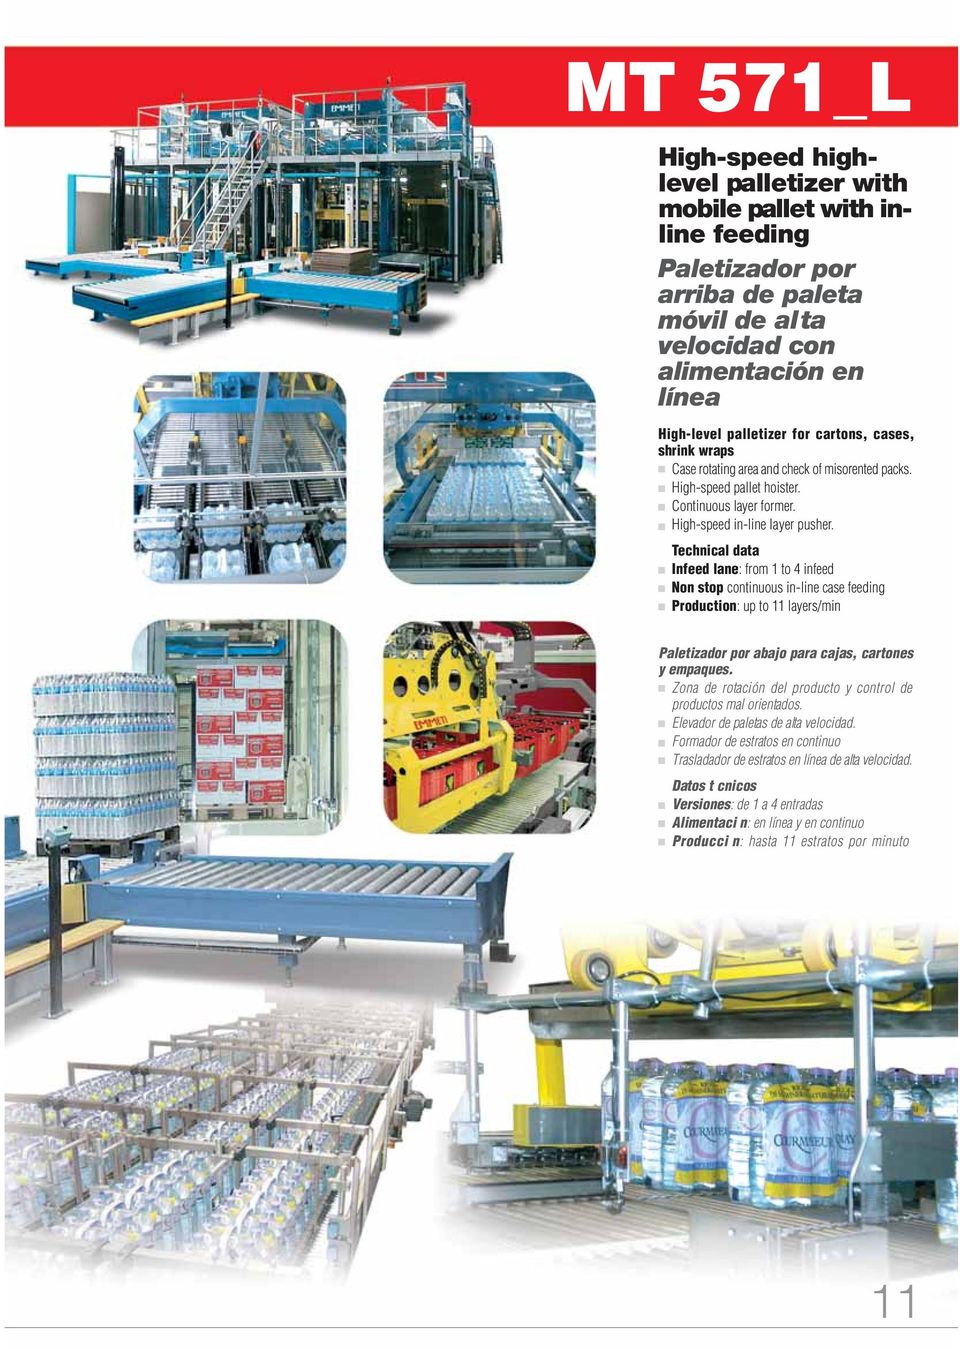 Technical data Infeed lane: from 1 to 4 infeed Non stop continuous in-line case feeding Production: up to 11 layers/min Paletizador por abajo para cajas, cartones y empaques.